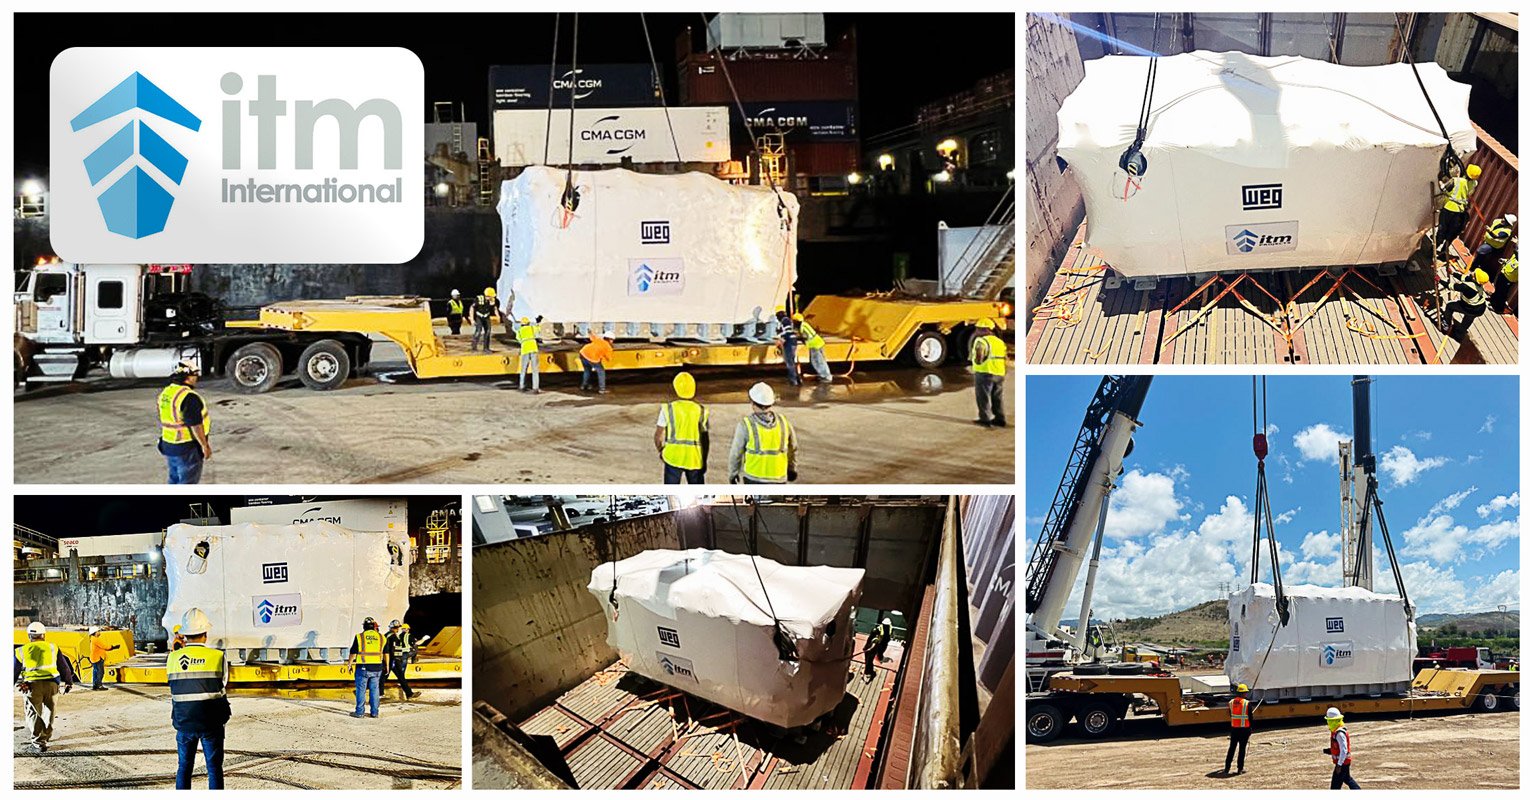 ITM Projects Handled WEG Transformers for Loading on a Container Ship as Breakbulk